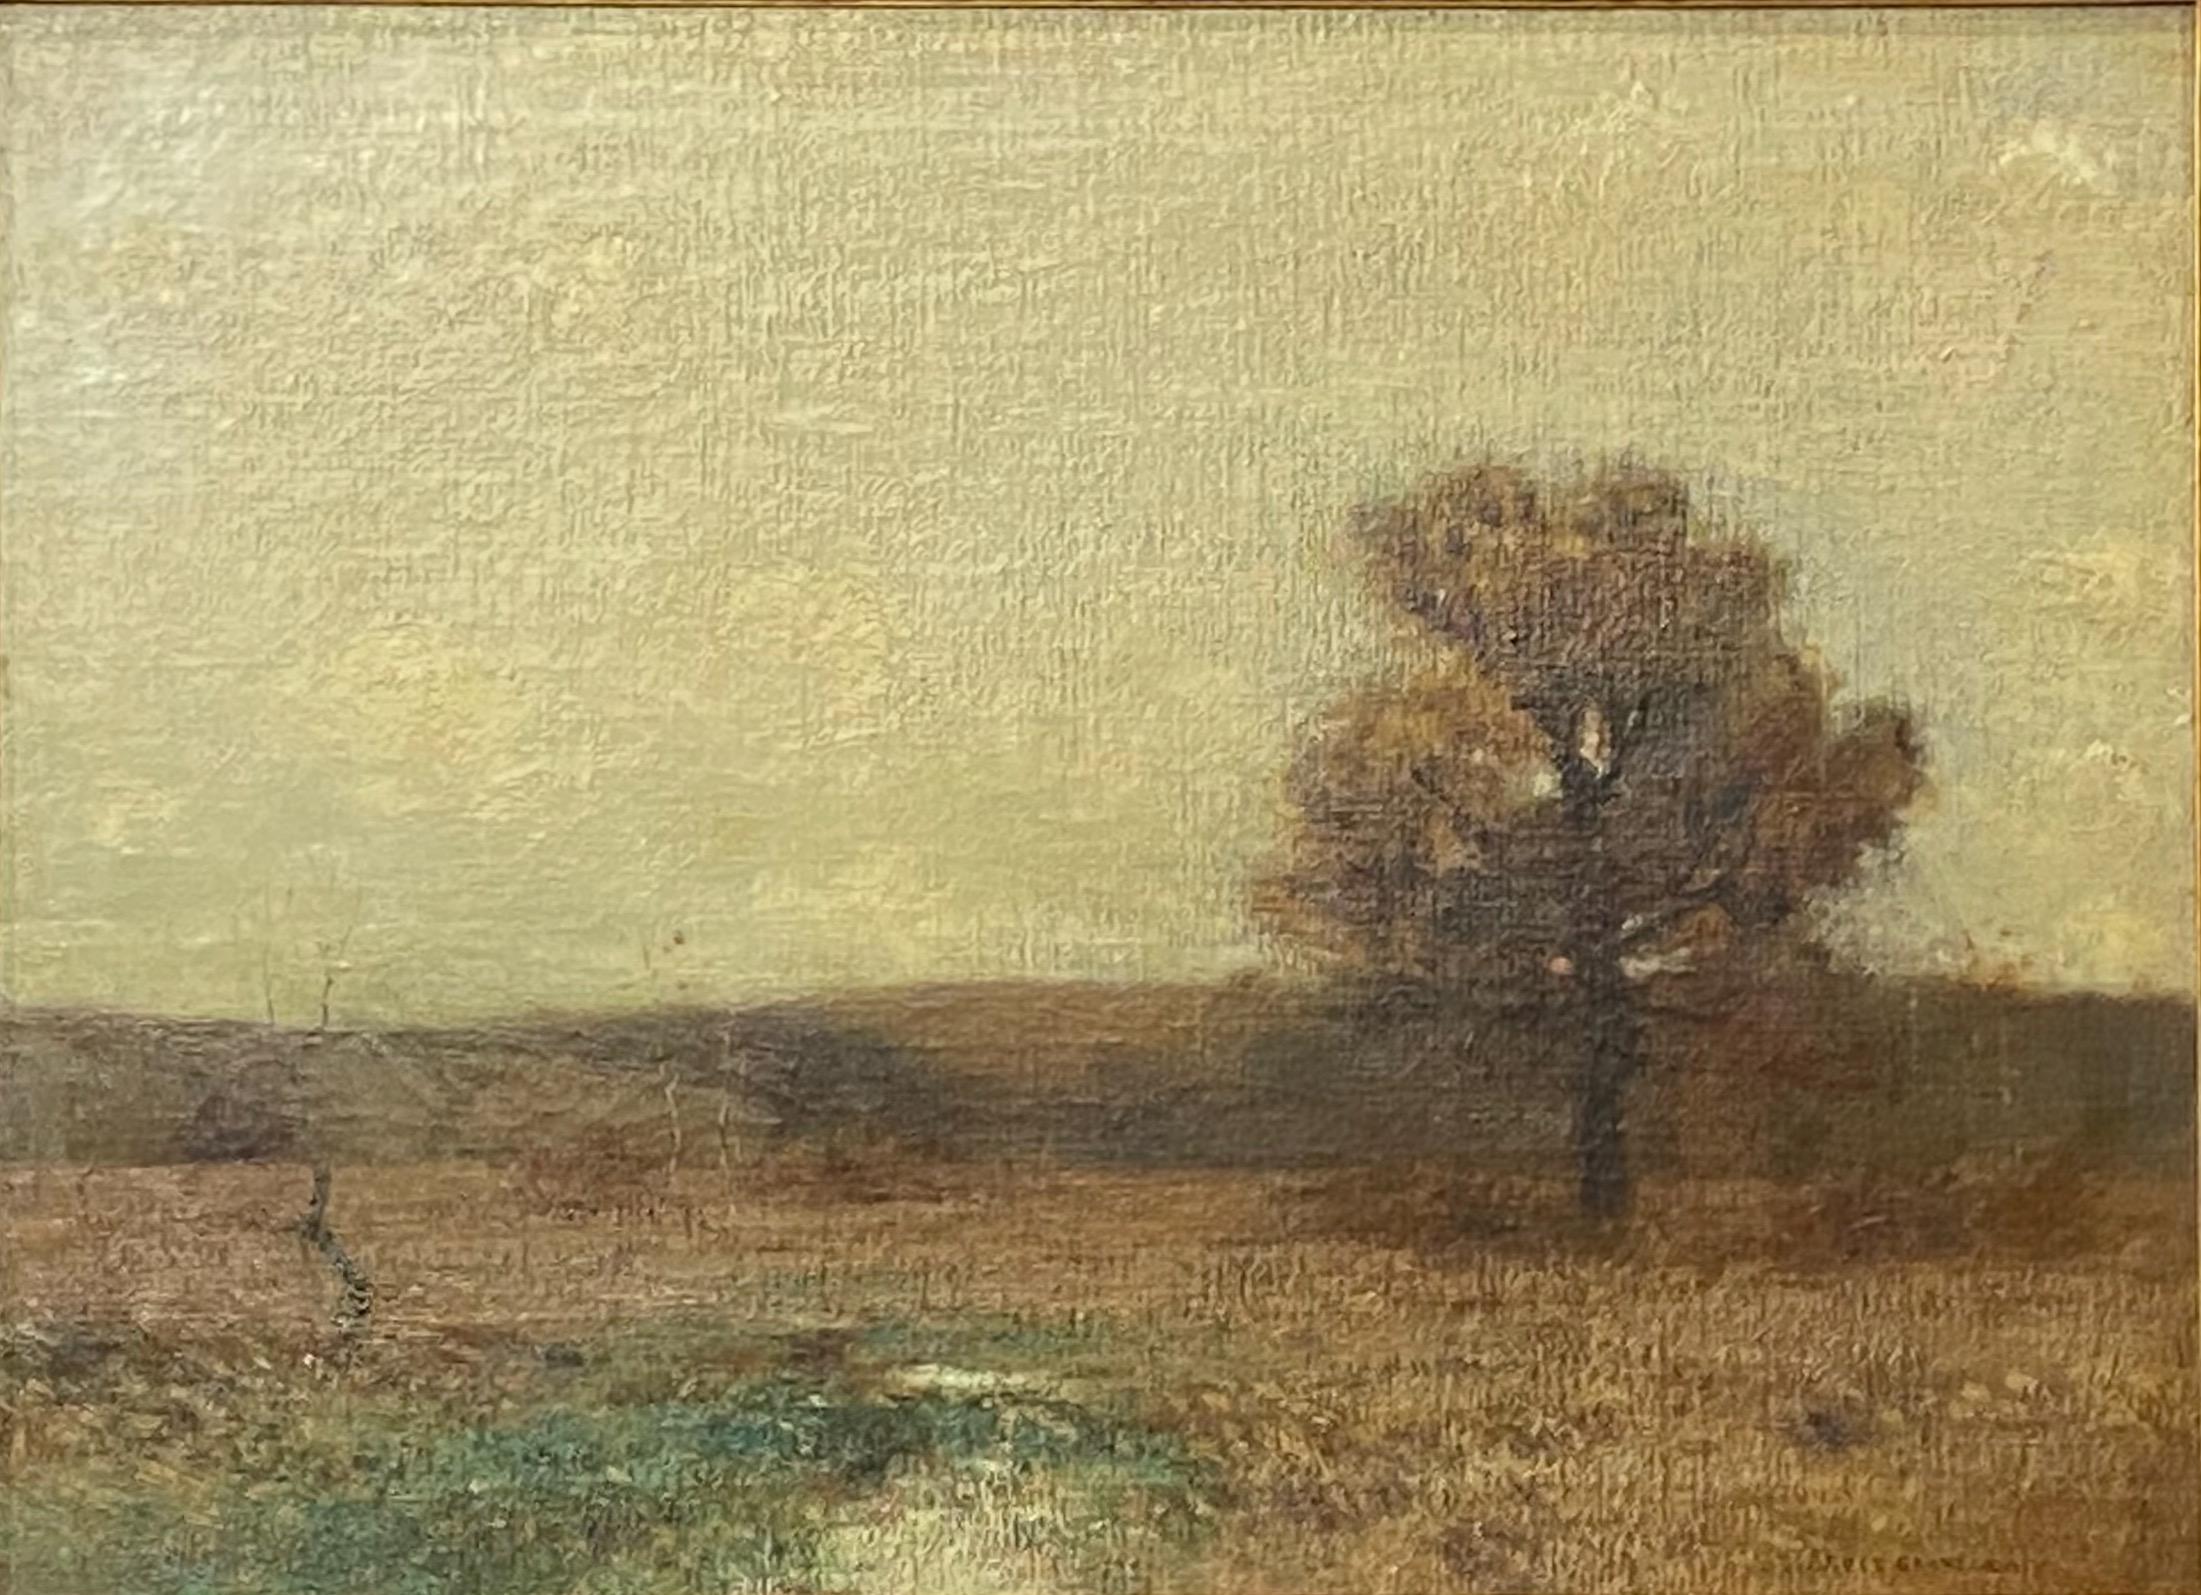 Large tonalist style landscape painting by American artist Bruce Crane in original frame.
Arts and Crafts period.
Signed lower right, original paper label on back reads 'Late Autumn Brandywine Valley, Pennsylvania.
Oil on canvas, early 20th